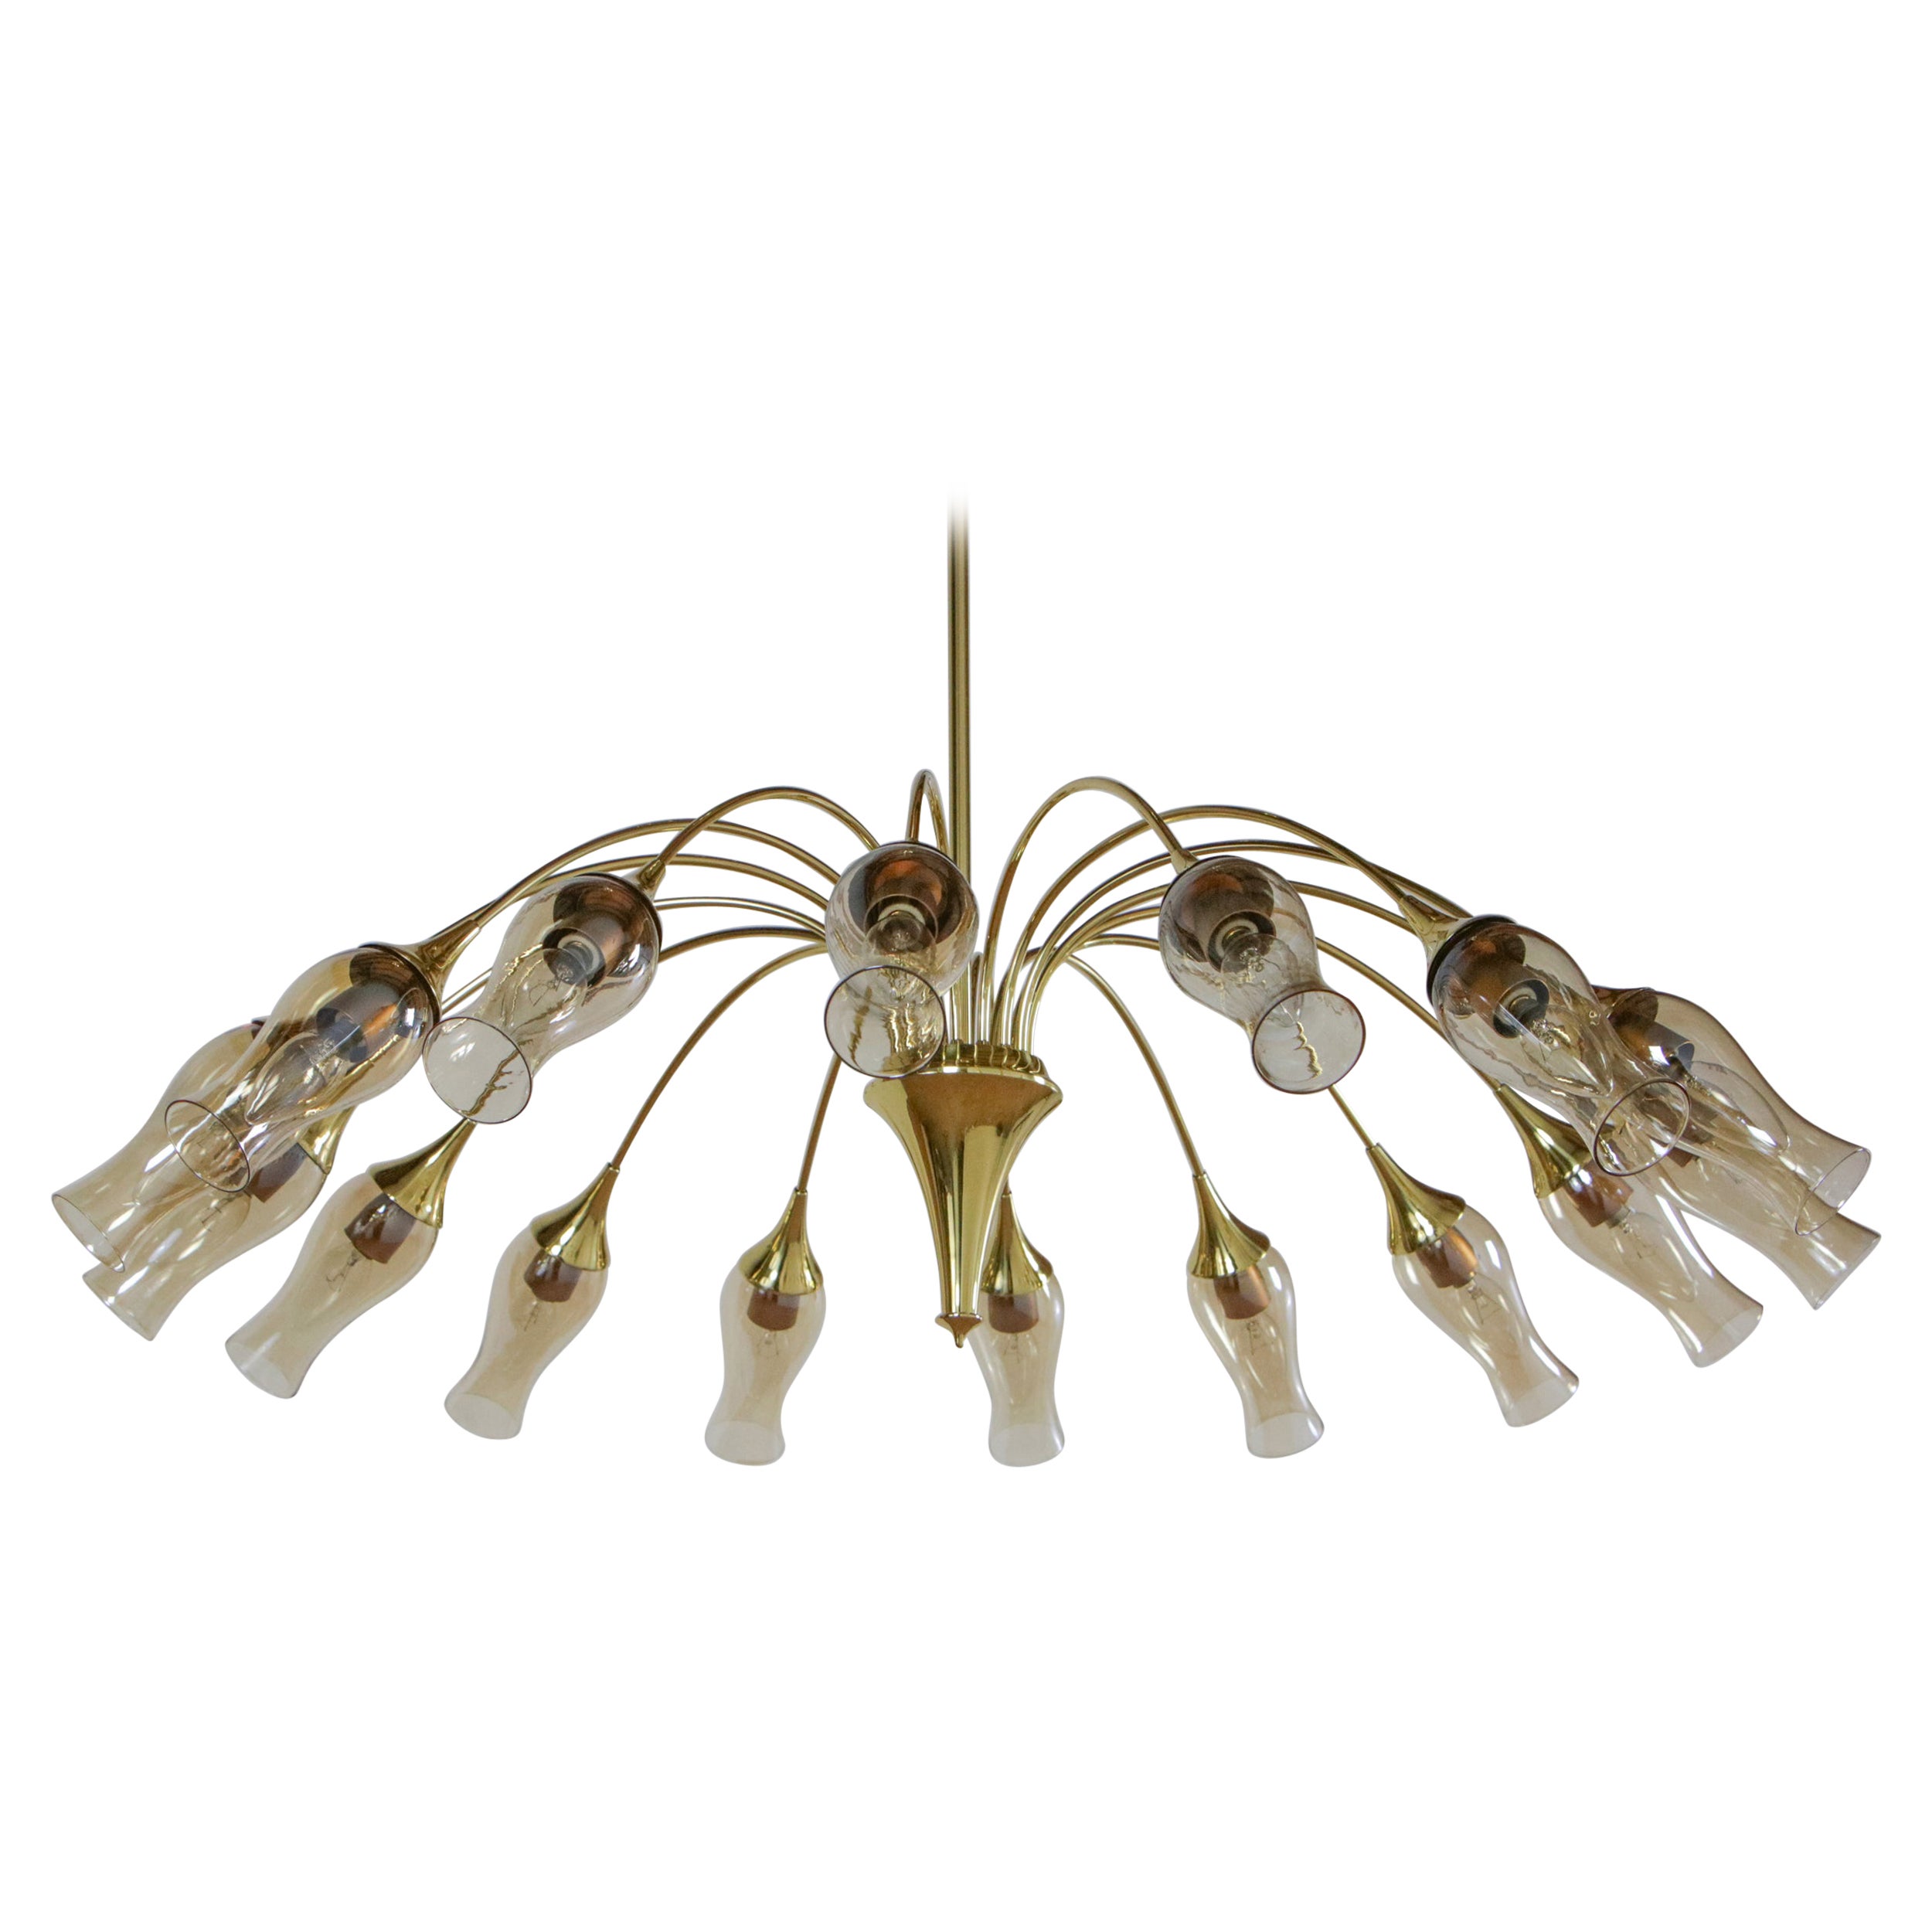 Beautiful Italian big spider Murano glass chandelier, made of brass, and painted aluminum, 16 lights in E14 format, amber-colored. This chandelier has a truly spectacular scenic impact, great executive quality, splendid and refined Murano glass.